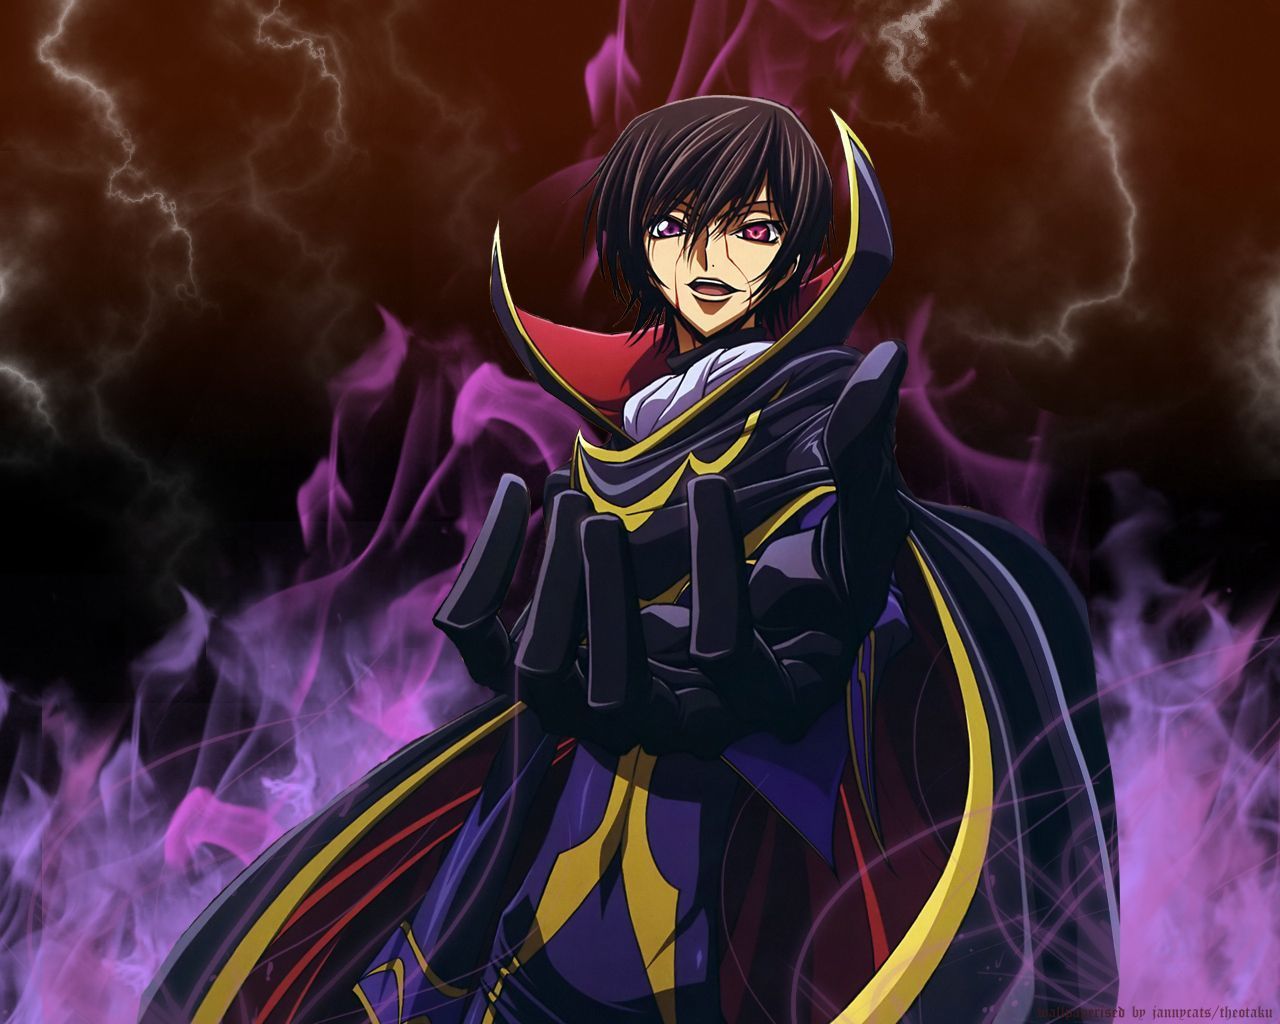 Lelouch vi Britannia screenshots, images and pictures - Comic Vine